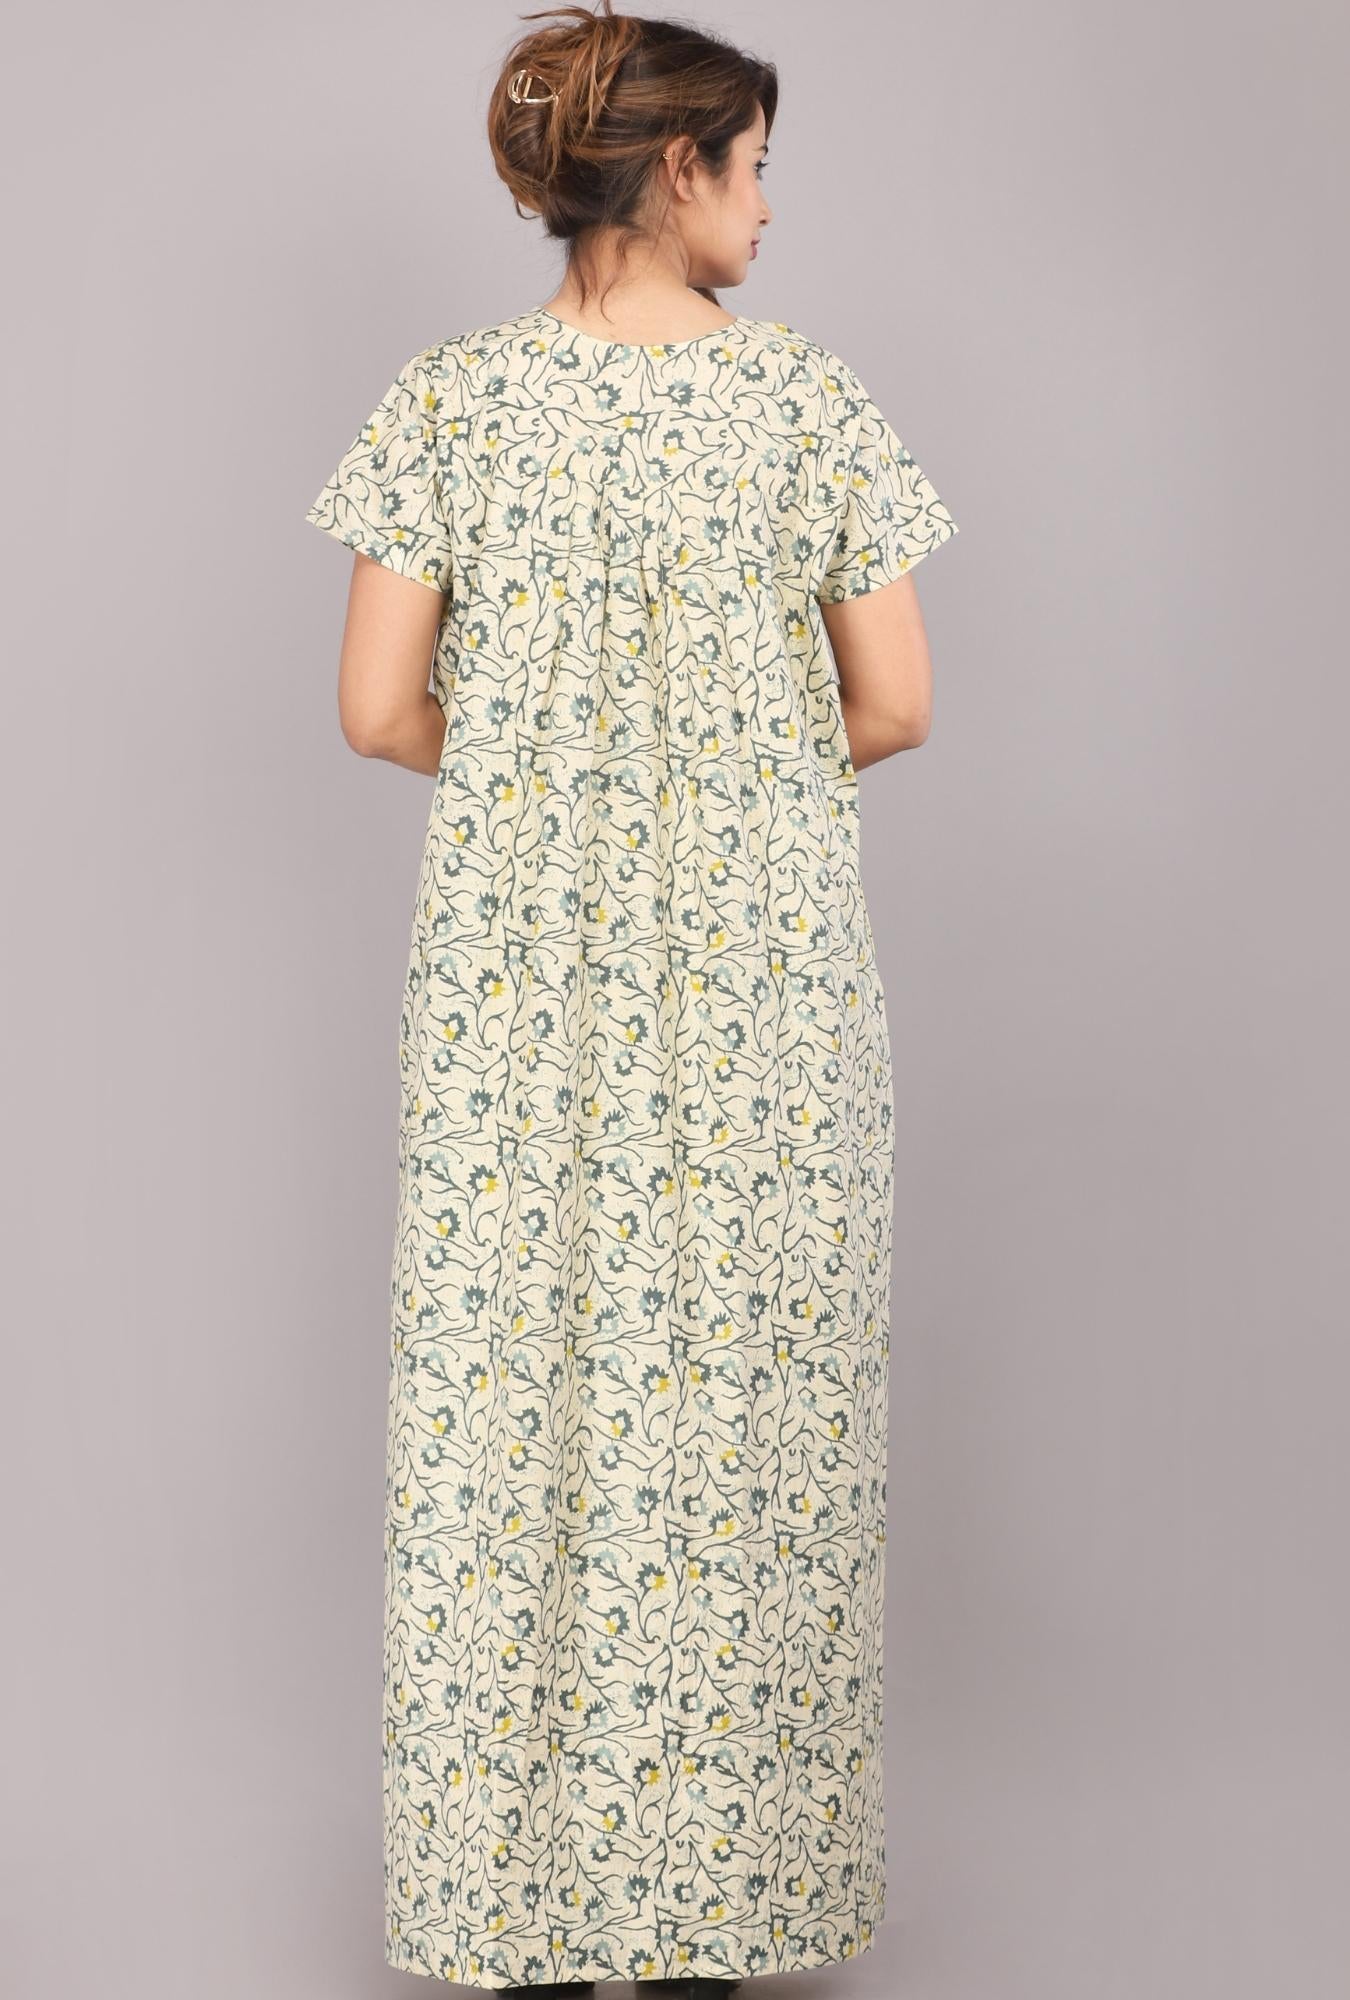 Two Tone Flower Grey Cotton Printed Nightwear Gowns